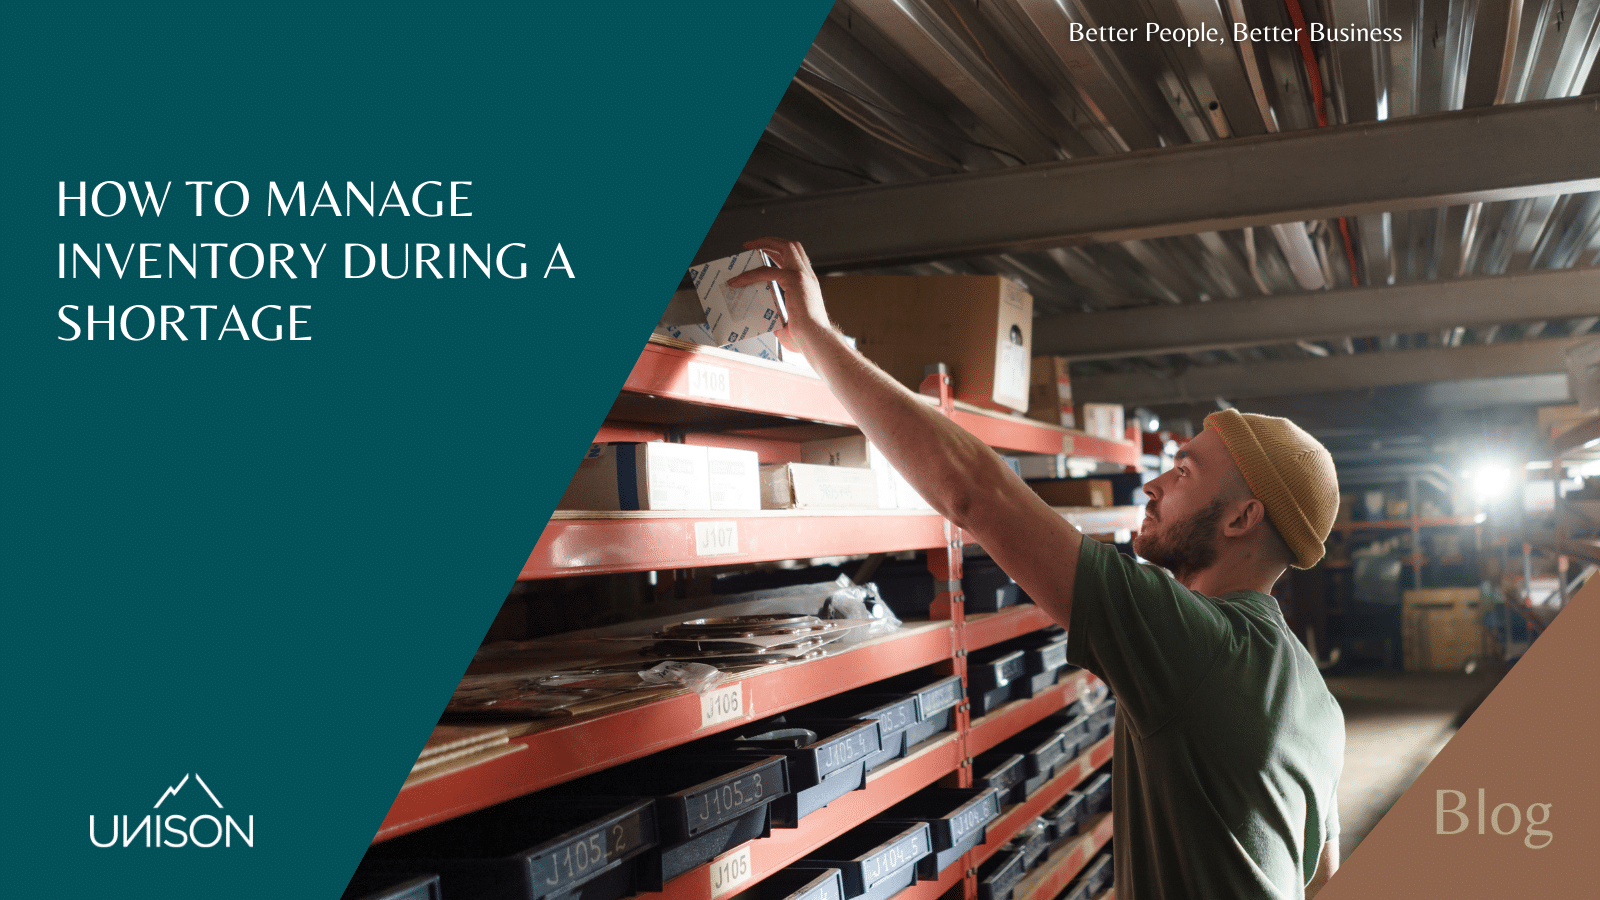 How to manage inventory during a shortage